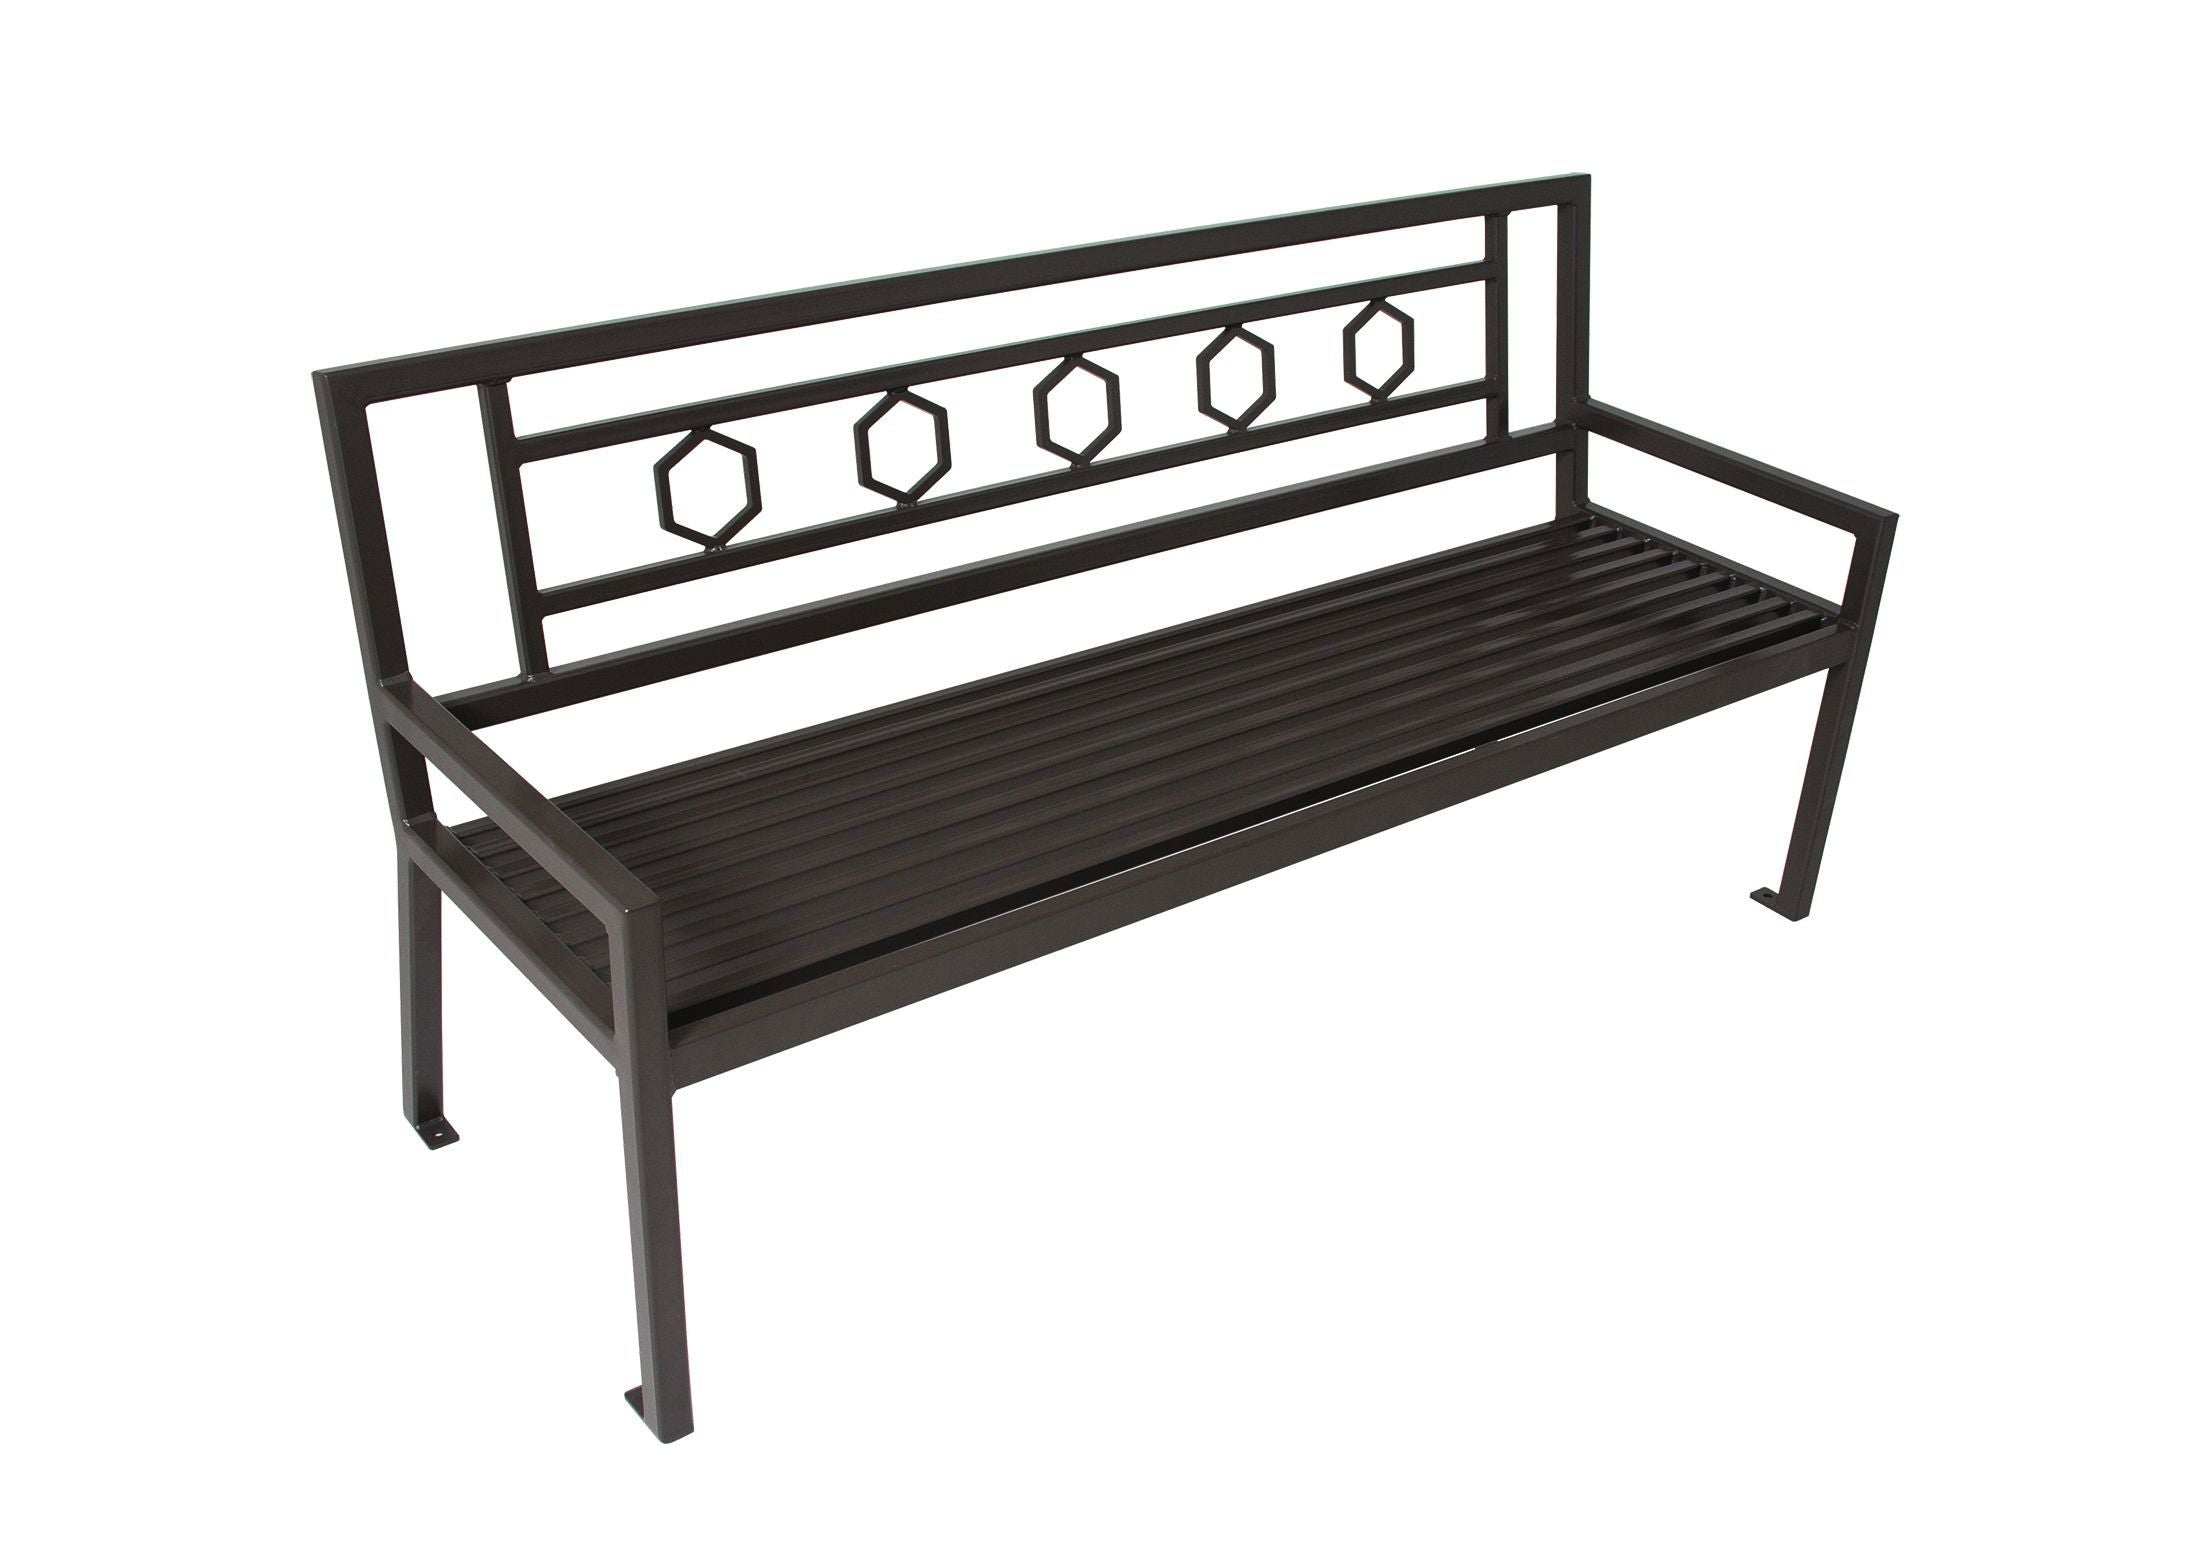 Huntington Bench with Back | WillyGoat Playground & Park Equipment